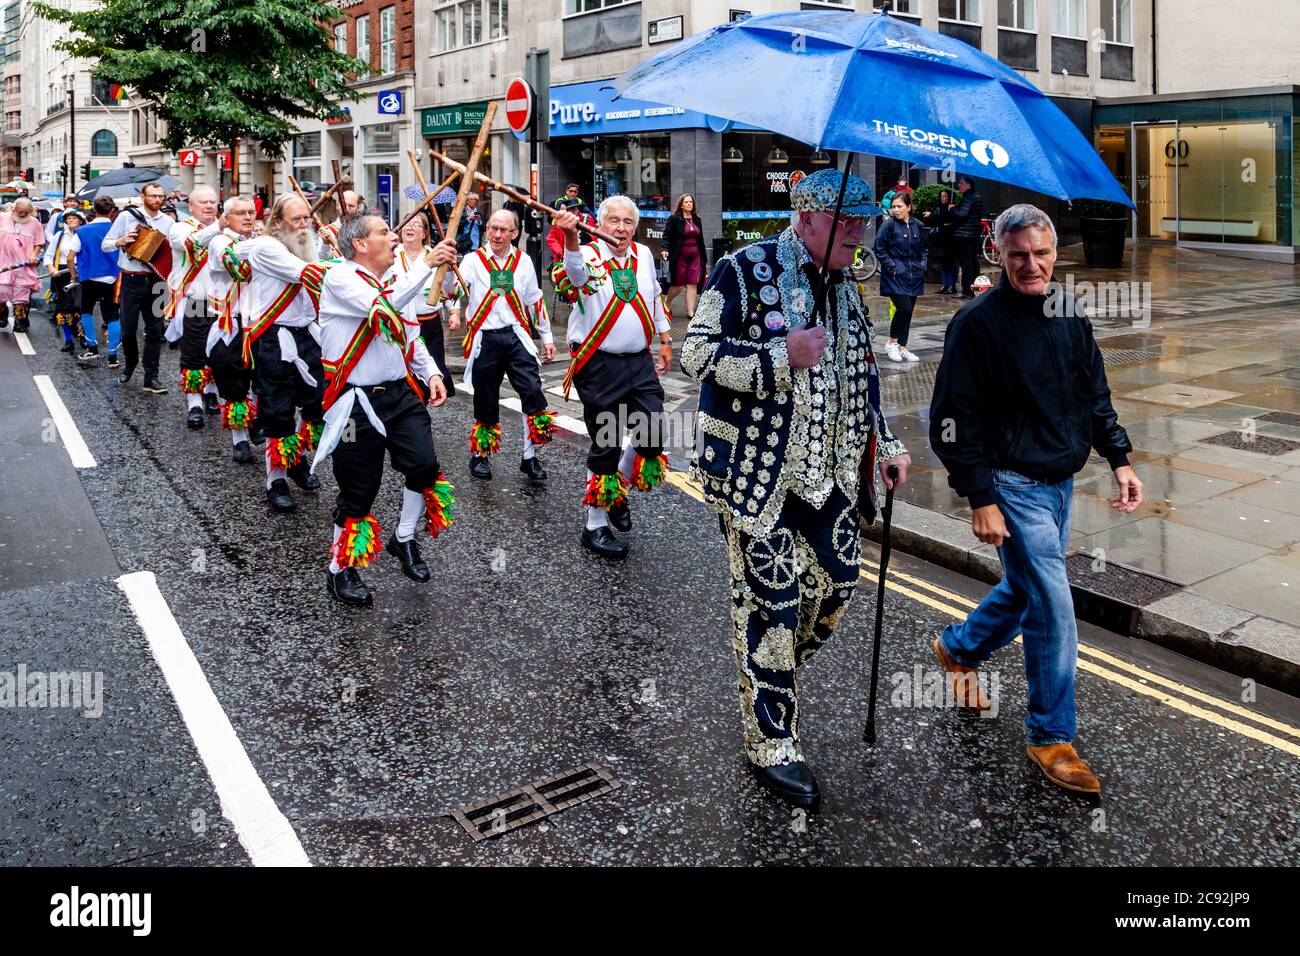 A Pearly King and Chingford Morris Dancers Make Their Way To The Bow Bells Church For The Annual Pearly Kings and Queens Harvest Festival Service, UK Stock Photo